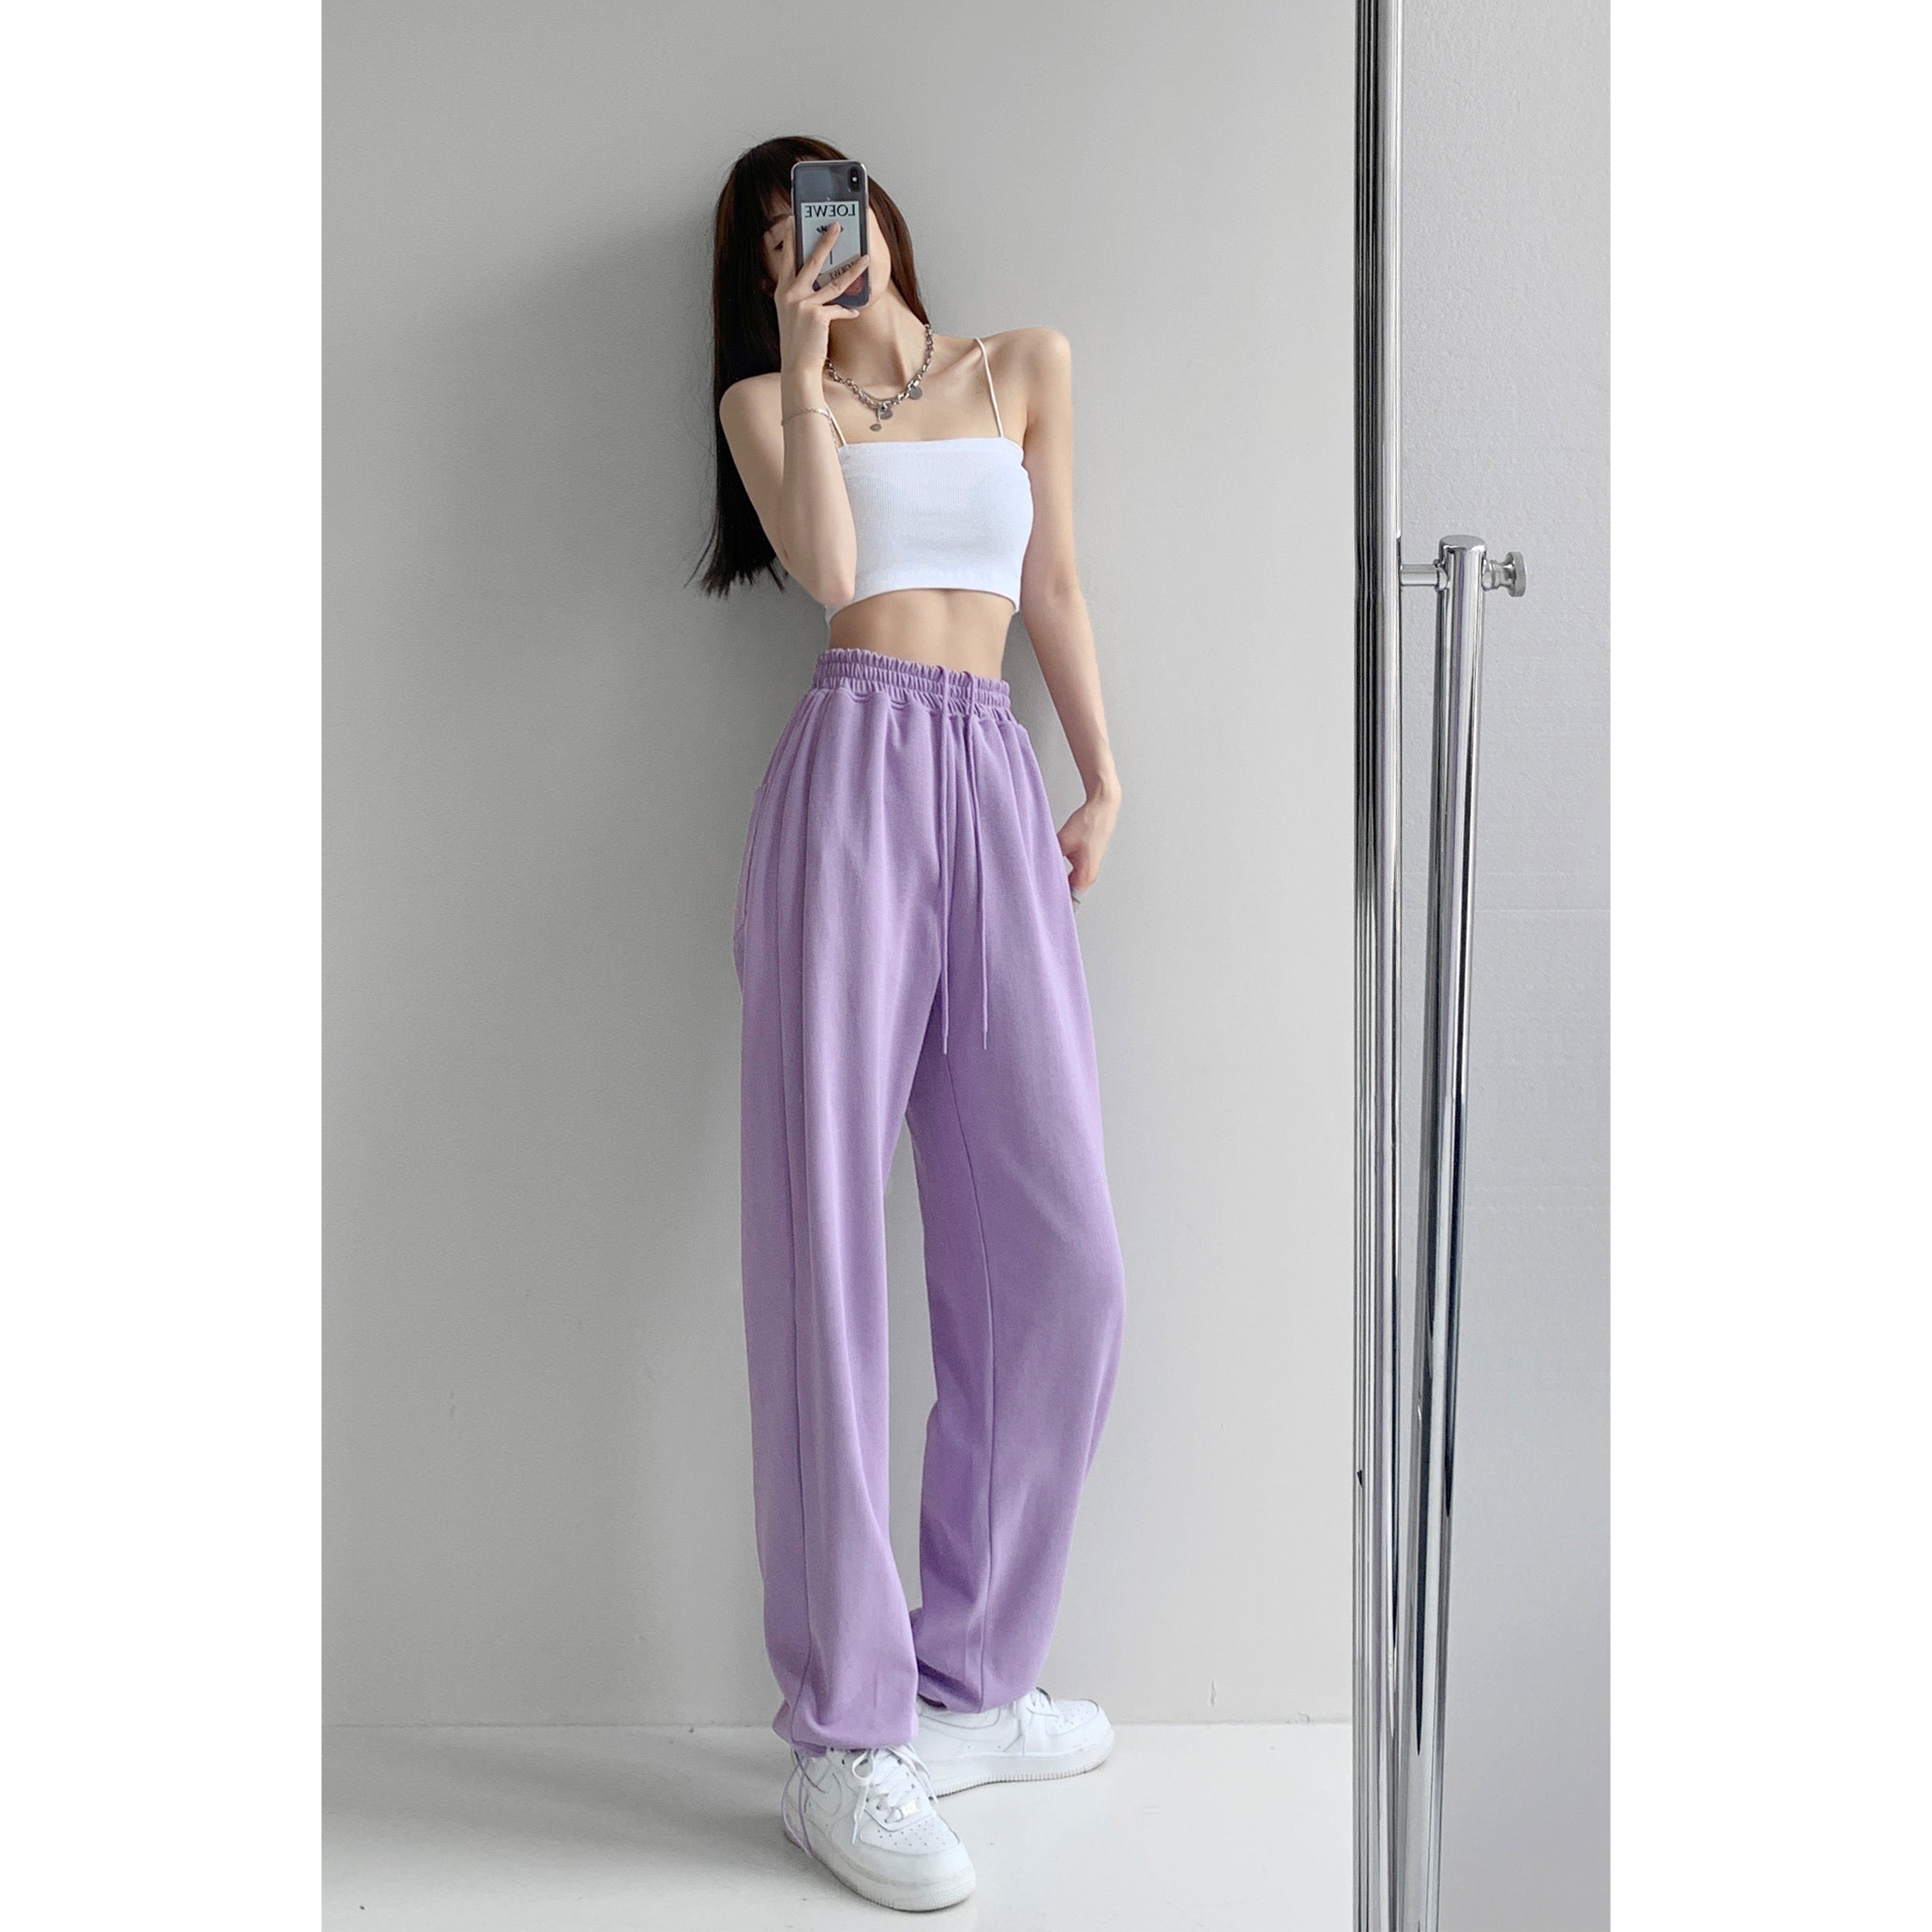 Hot girl blogger style loose sports pants women's spring and